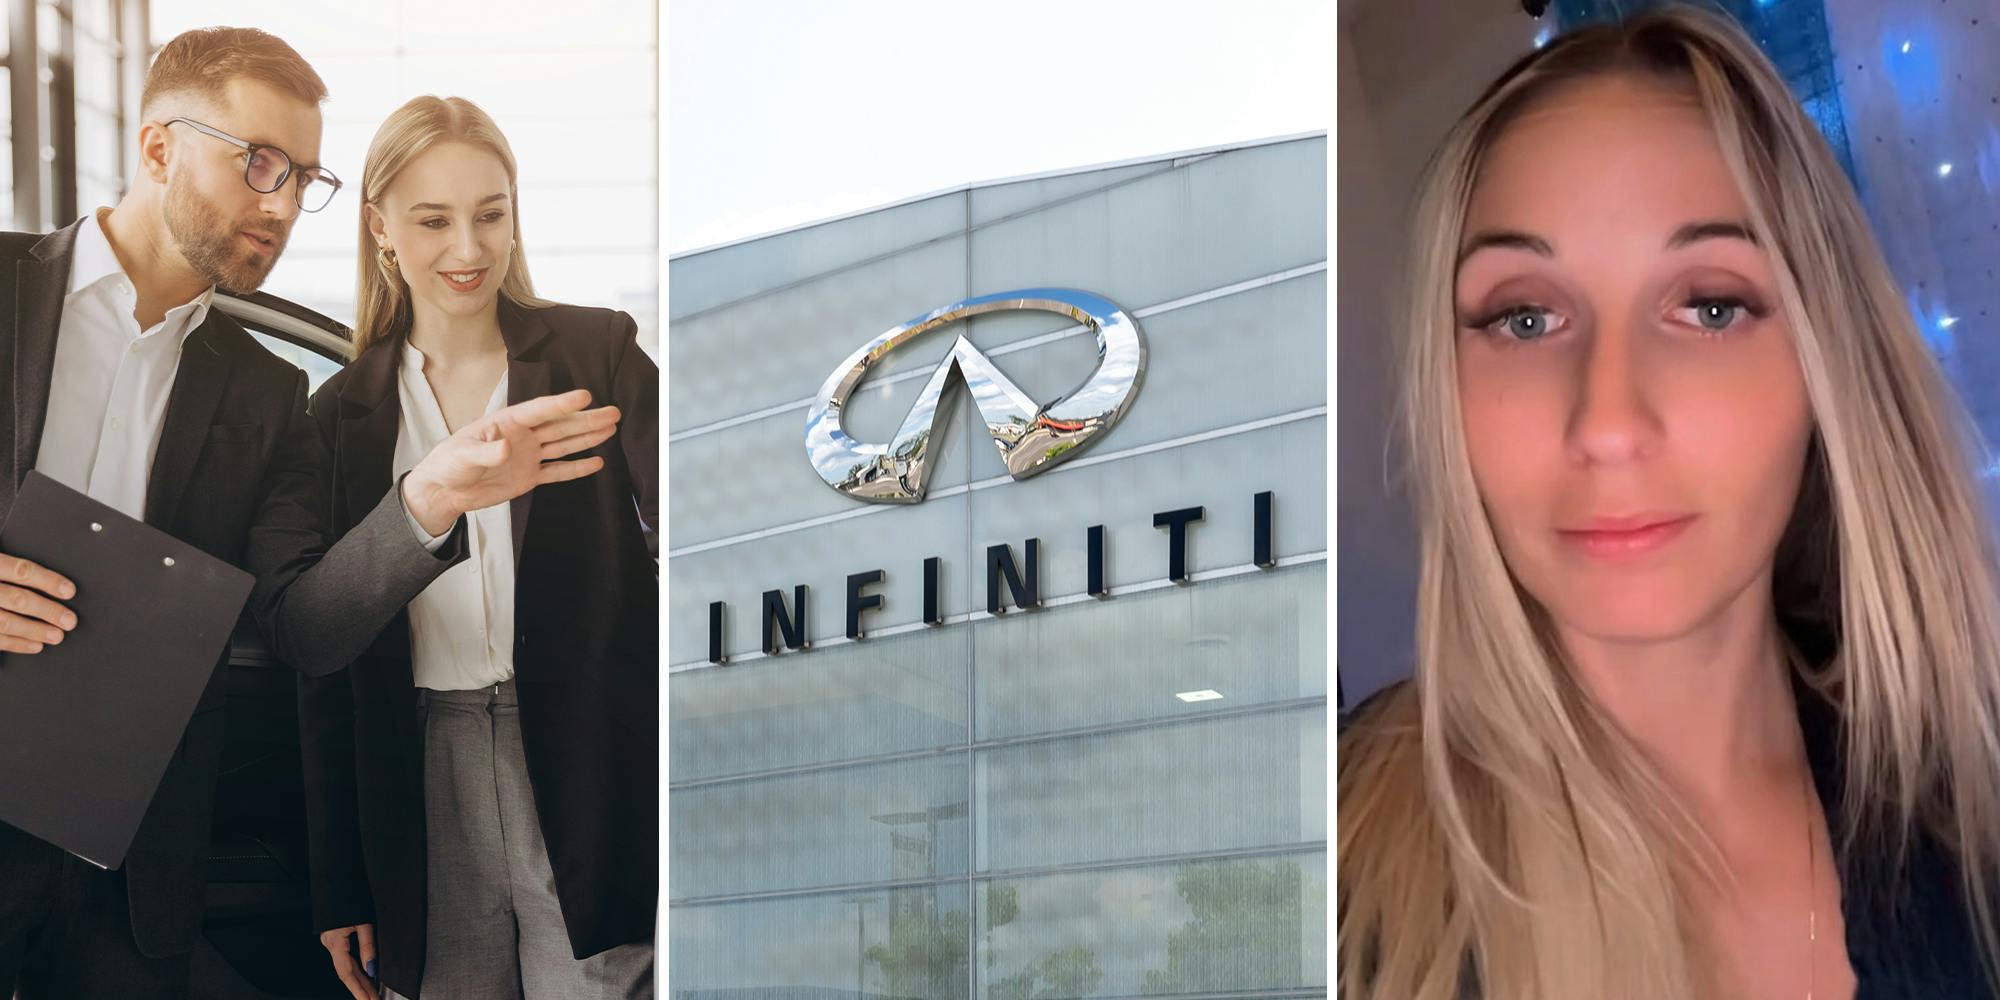 Woman catches car salesman trying to scam her at Infiniti dealership